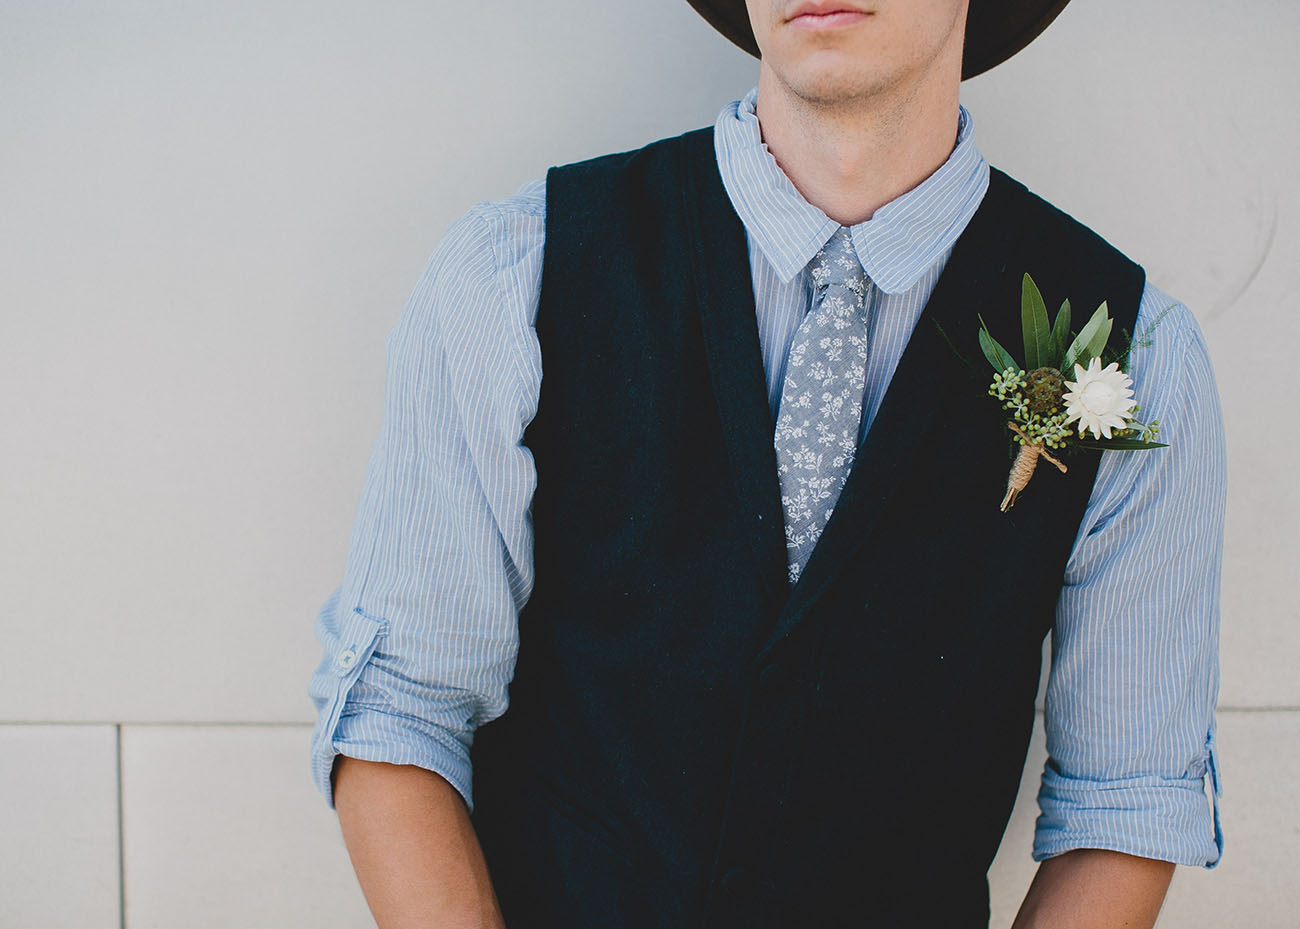 GWS x Neck & Tie Company Collection is here! The Creative's Loft Grooms